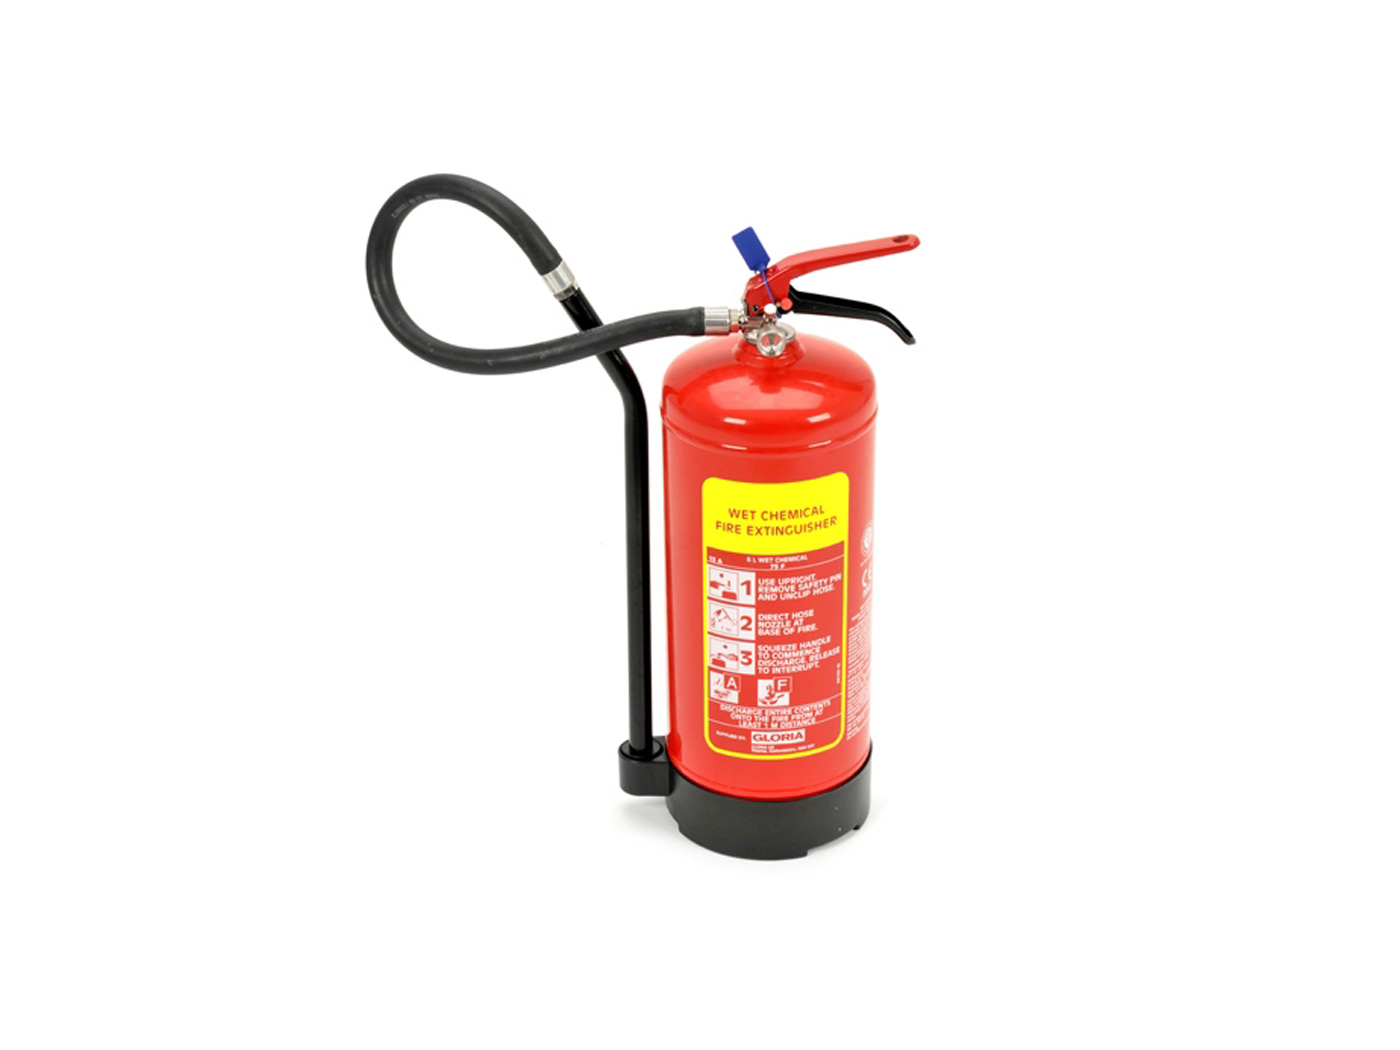 Wet Chemical Fire Extinguisher Supplier in Abu dhabi